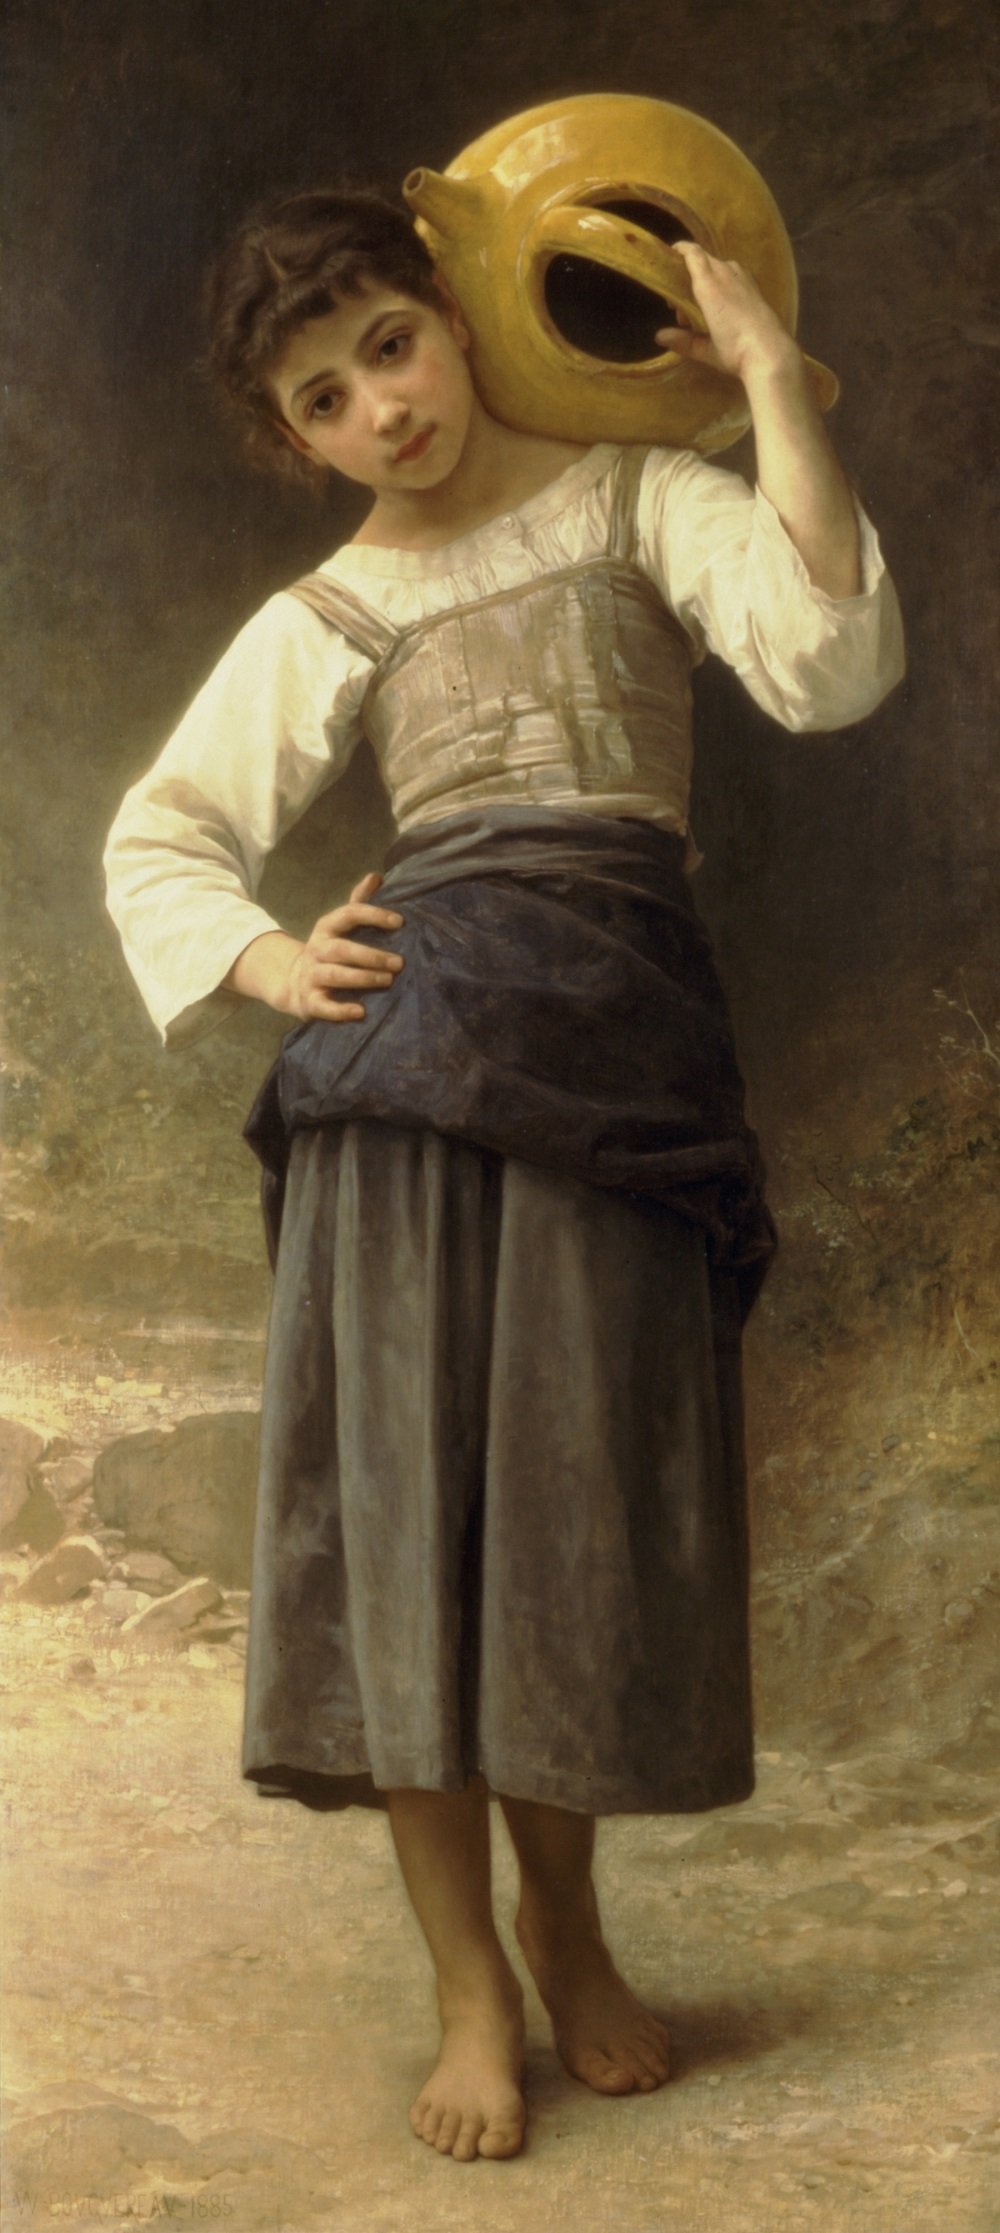 William-Adolphe_Bouguereau_(1825-1905)_-_Young_Girl_Going_to_the_Spring_(1885)-1000pix.jpg